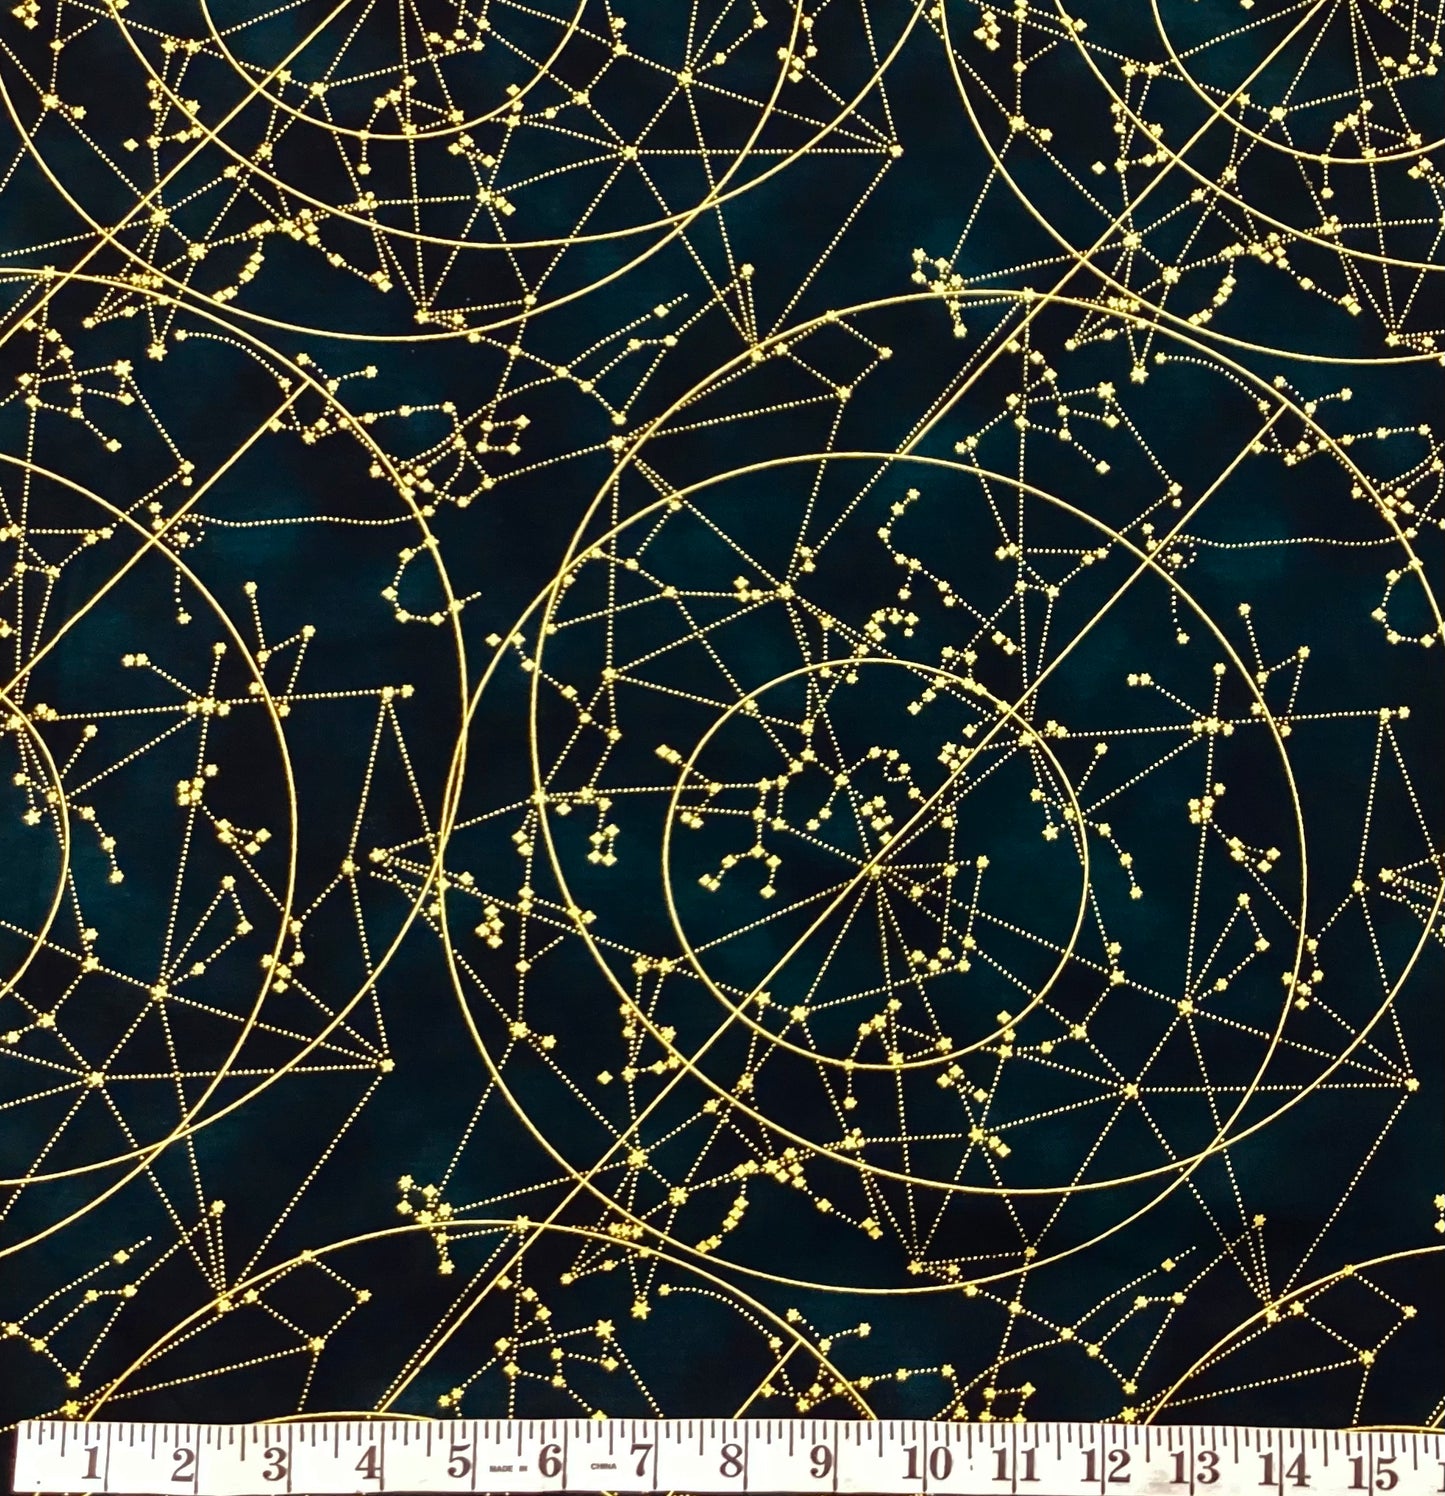 Fabric - Star Maps #21466-364 Astral